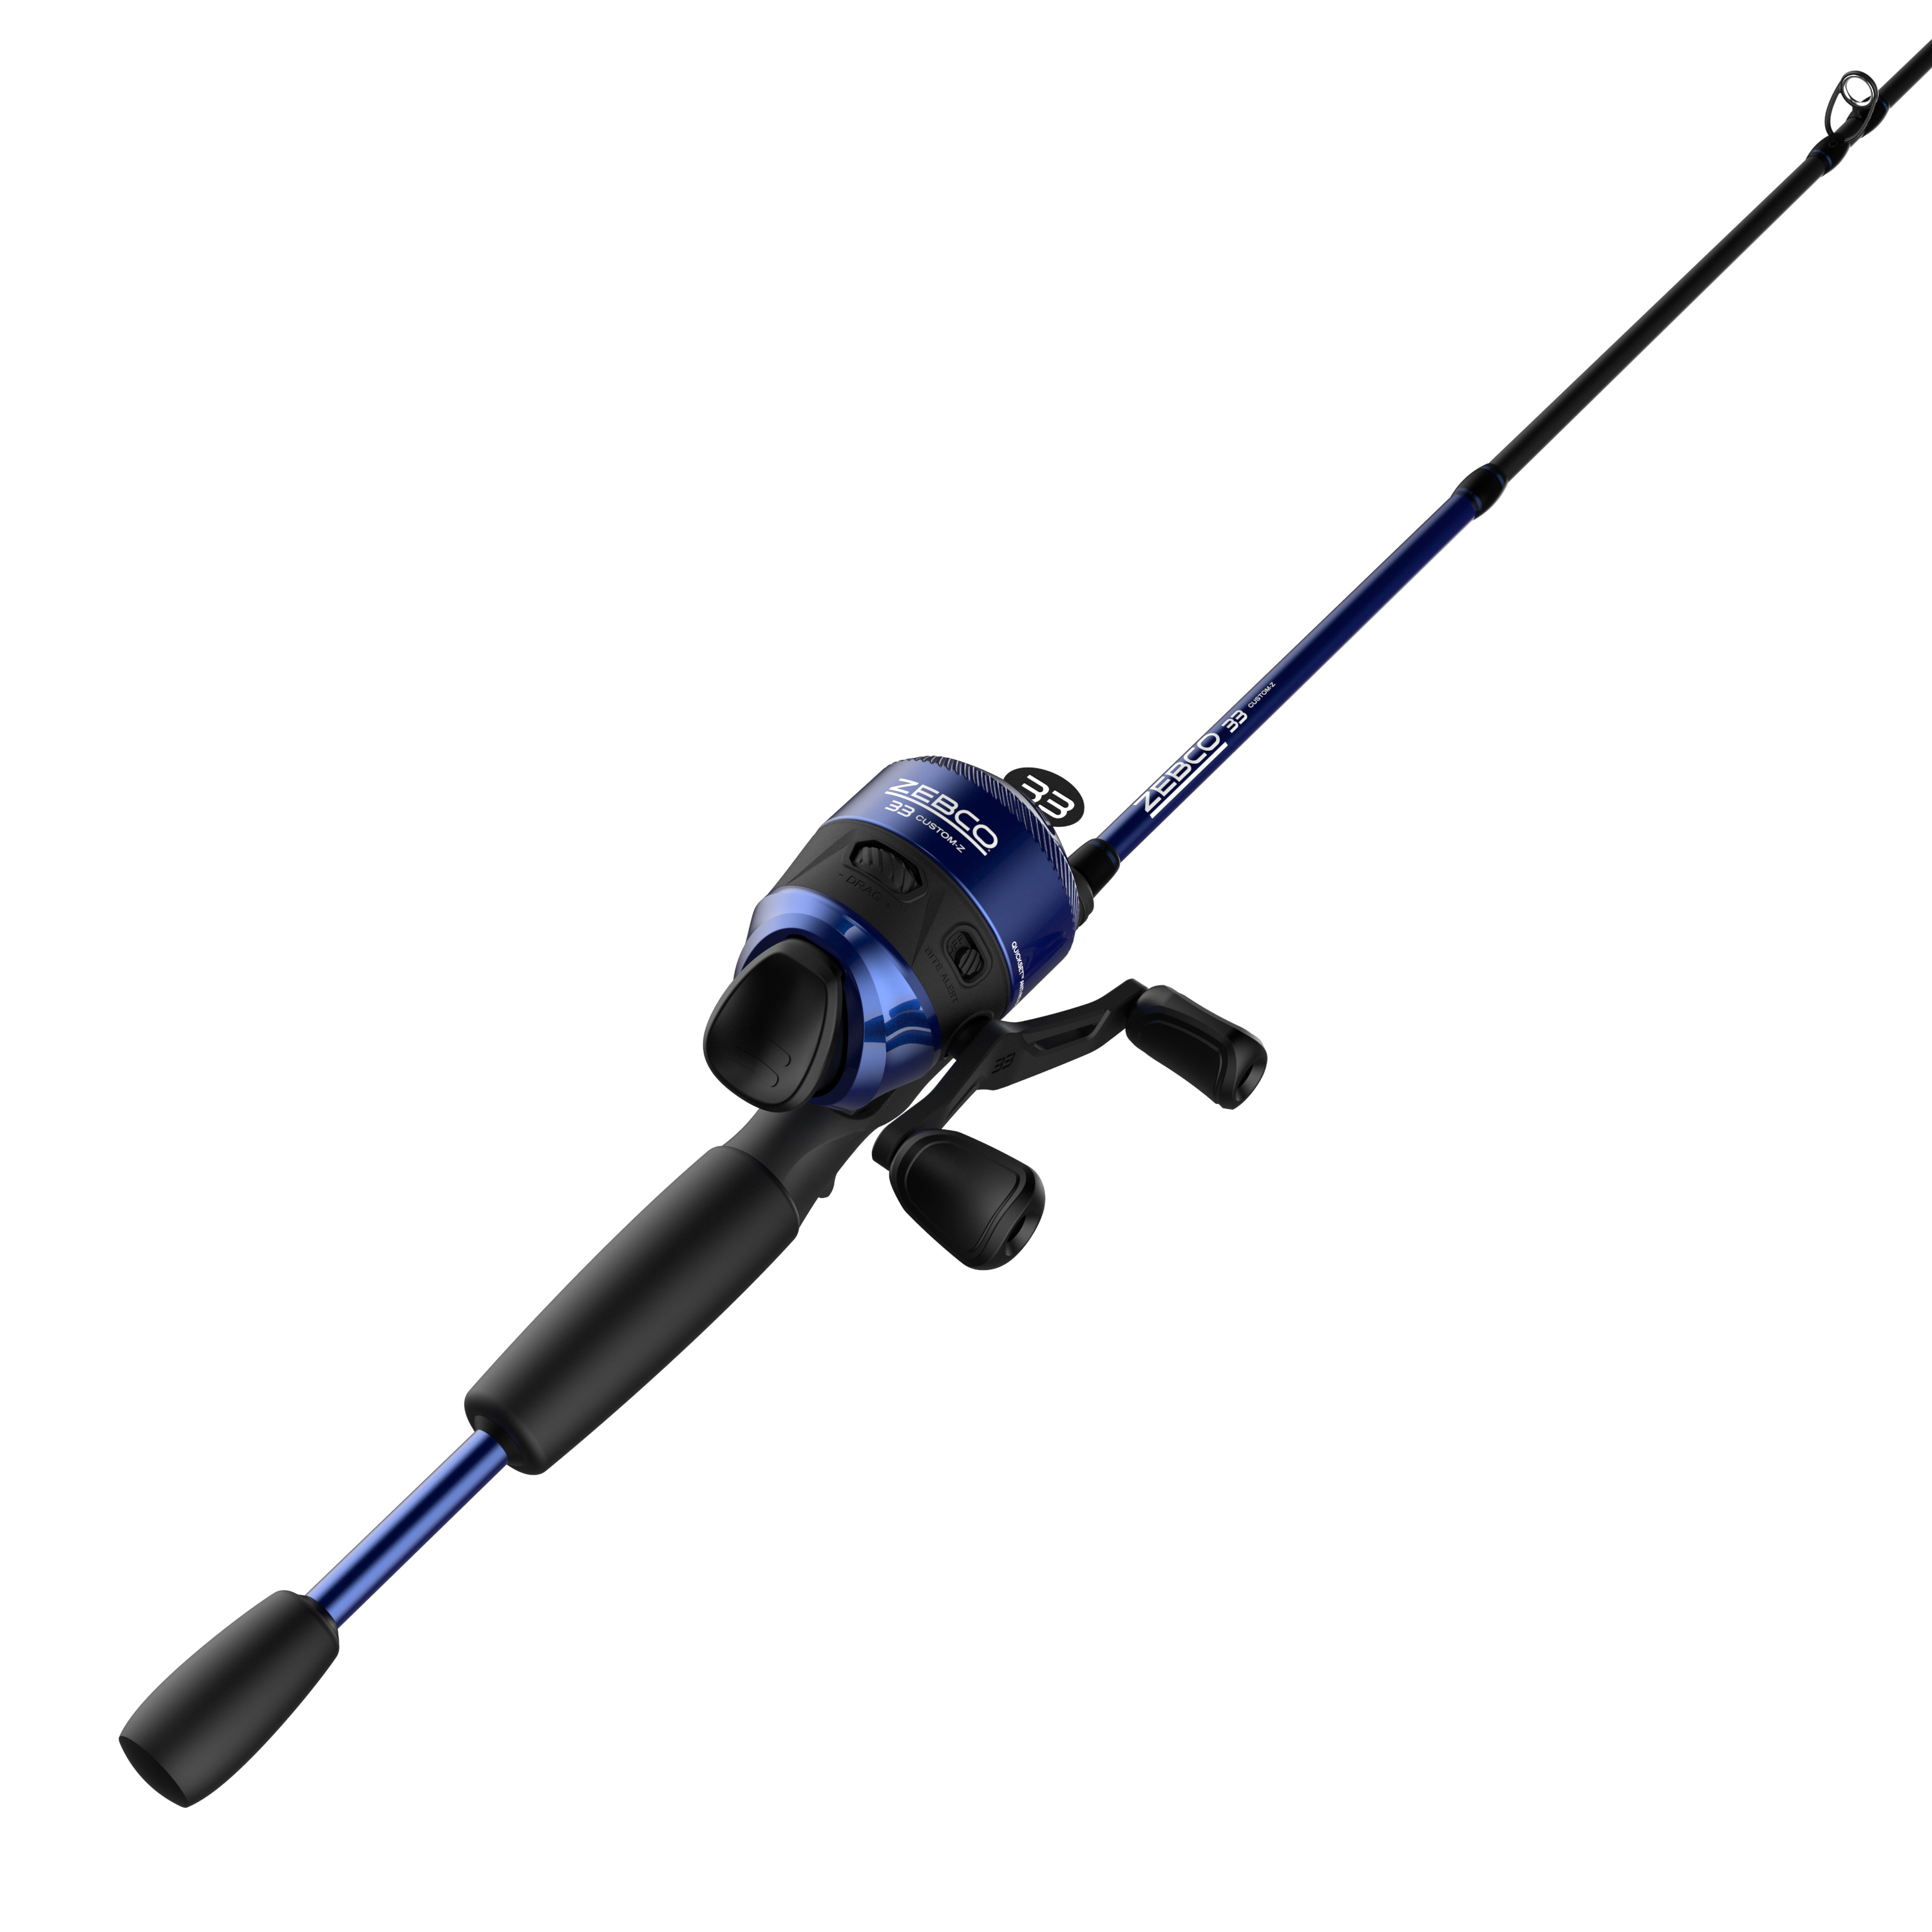 Zebco 33 Spincasting Rod and Reel Combo, 6' 2 Piece Combo - International  Society of Hypertension